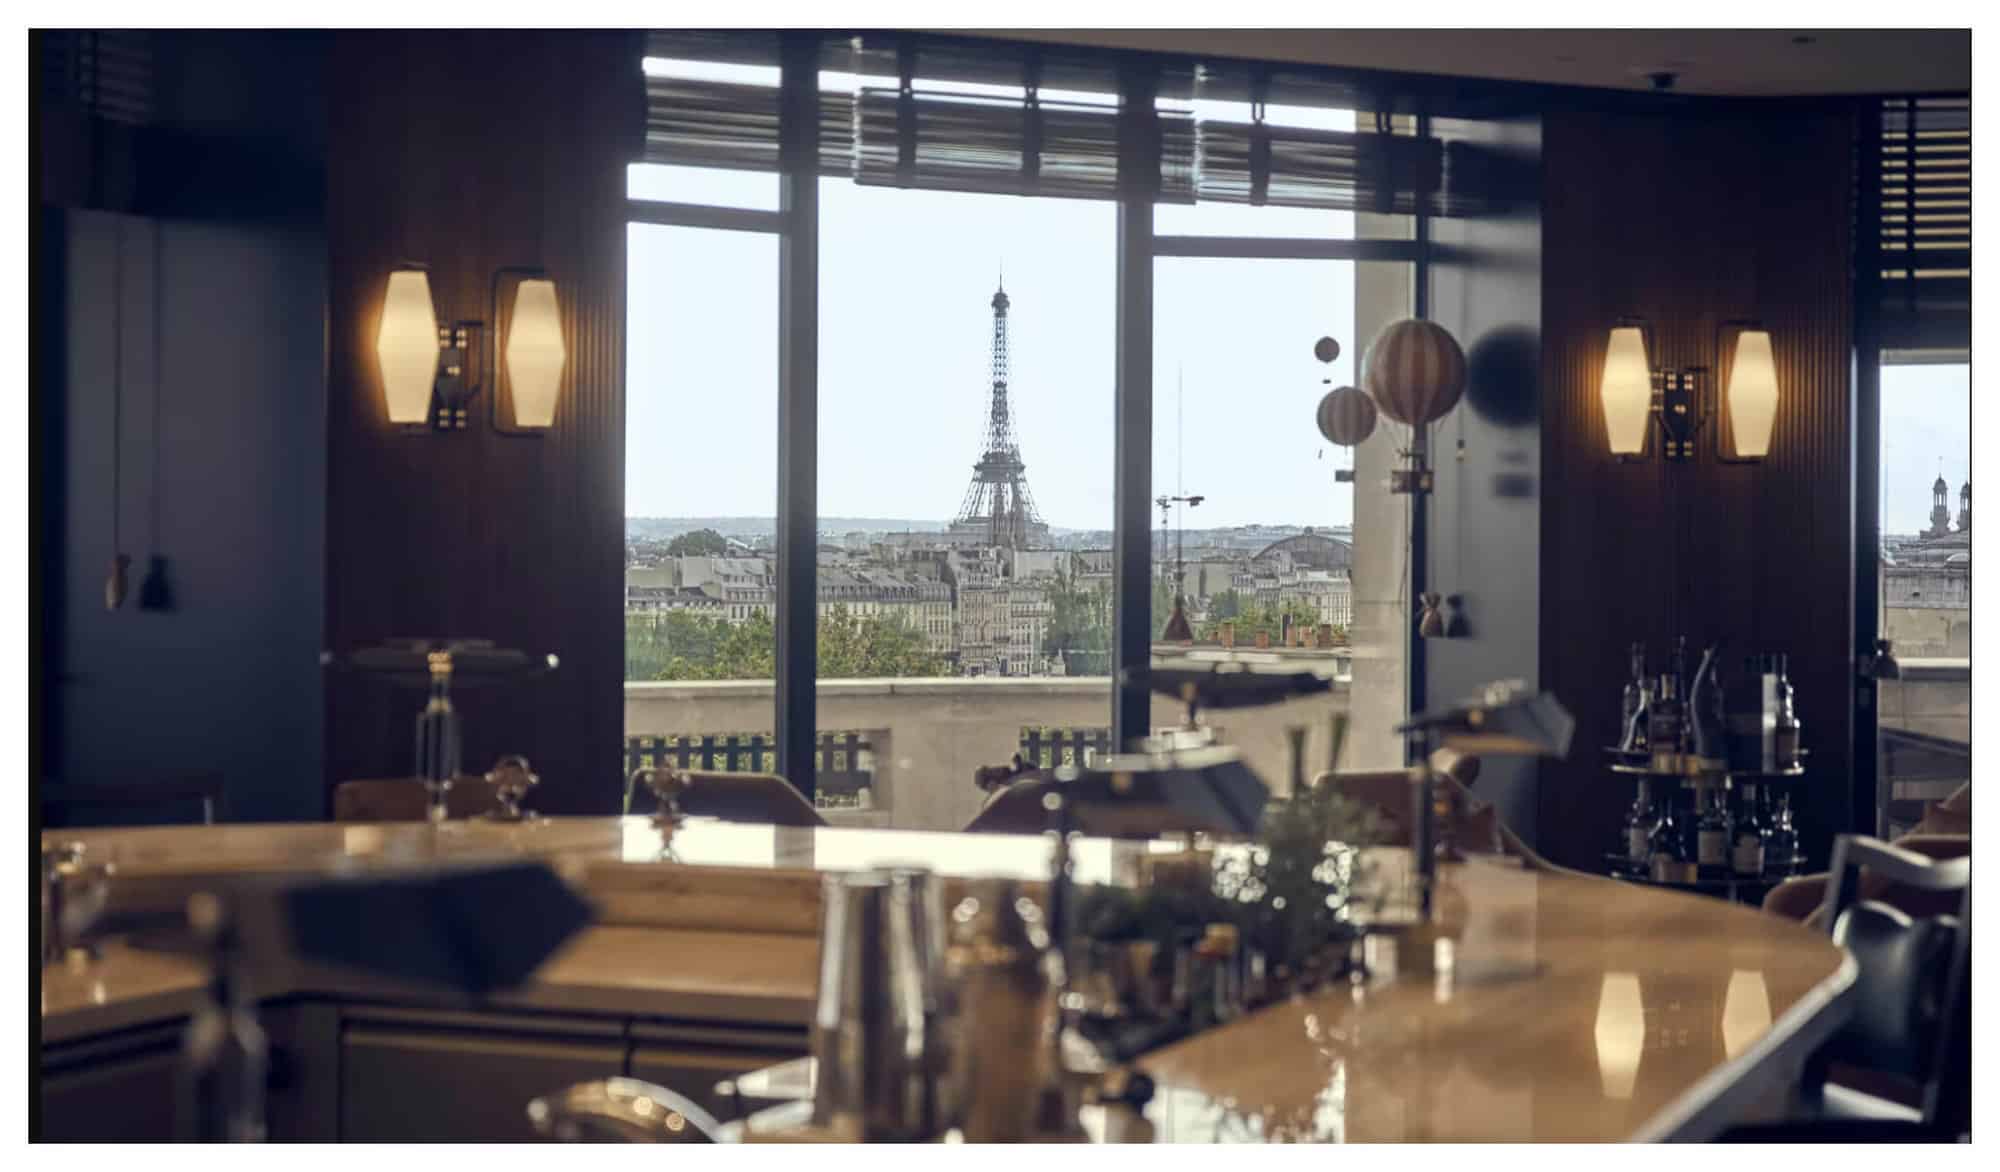 A bar with dark decor and marbled tables, overlooking the Eiffel Tower